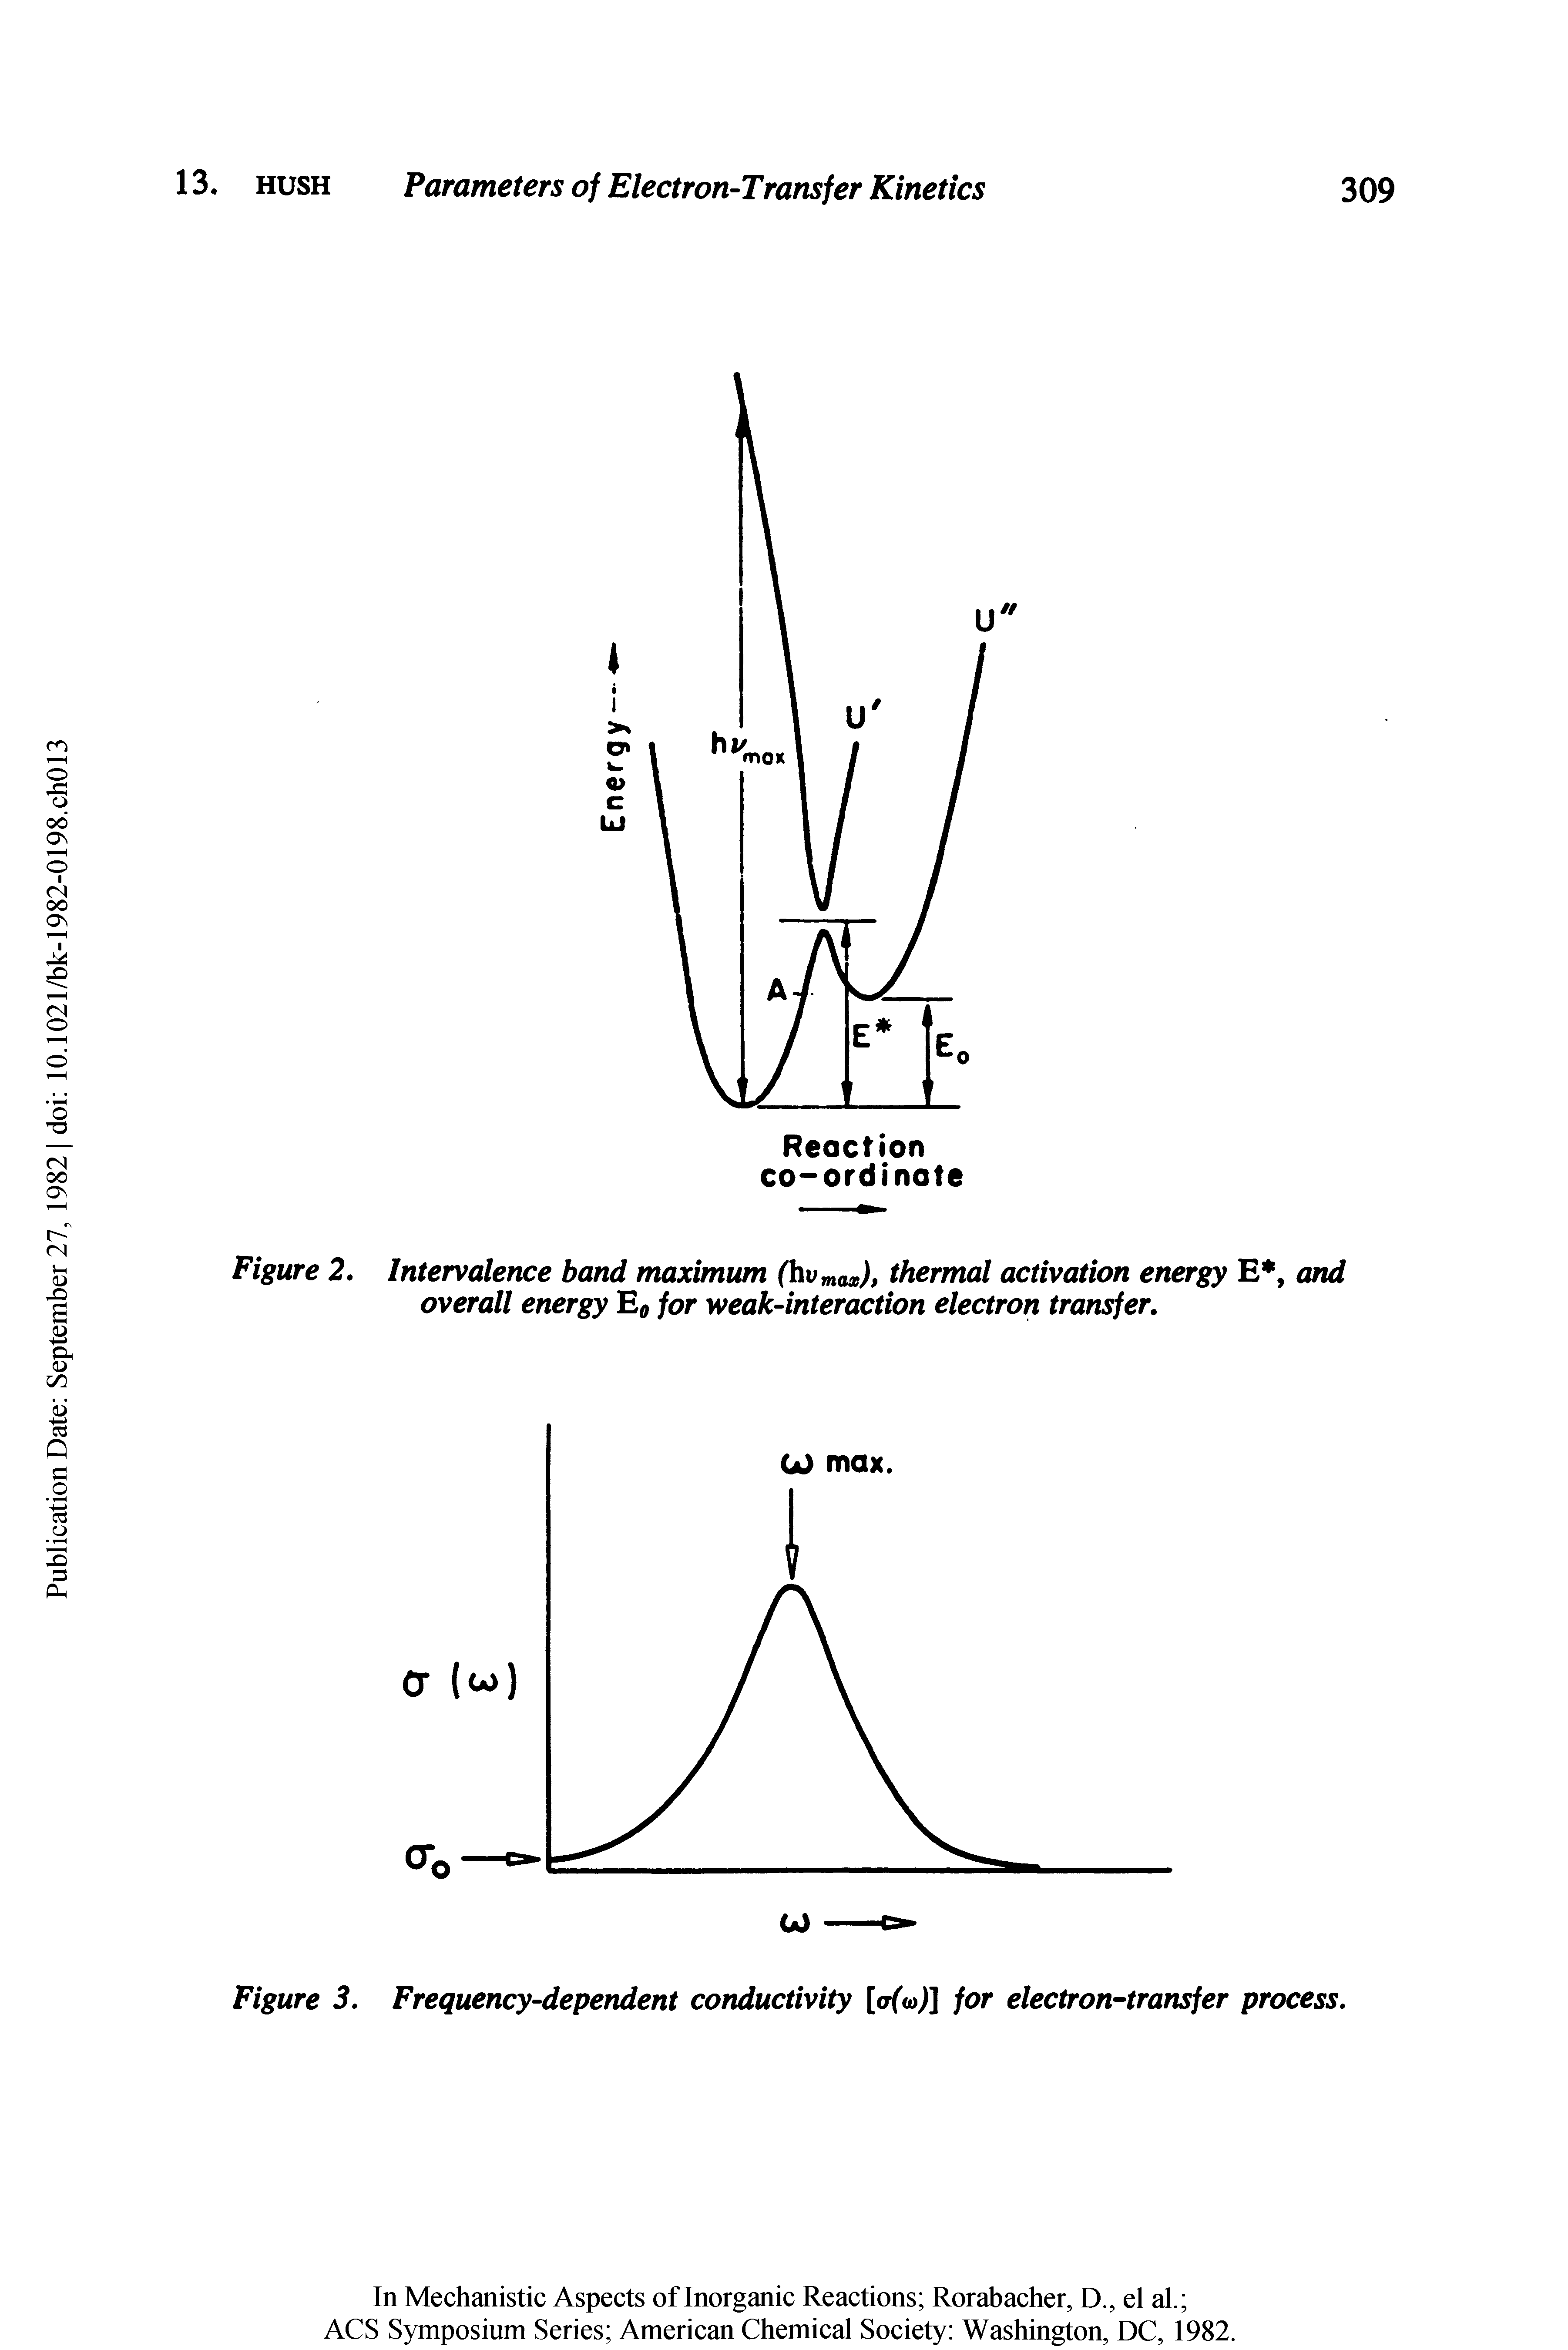 Figure 2. Intervalence band maximum (hvmax), thermal activation energy E, and overall energy E0 for weak-interaction electron transfer.